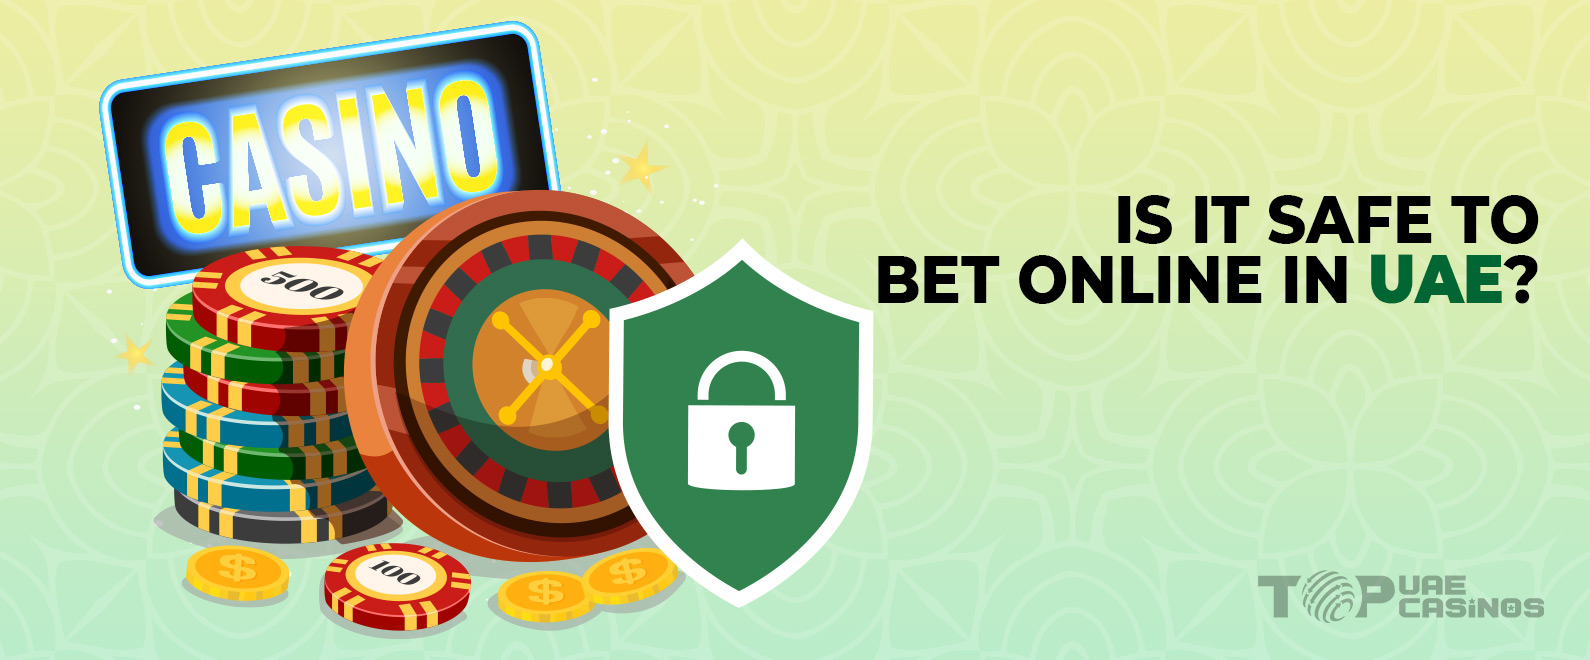 uae betting sites are safe